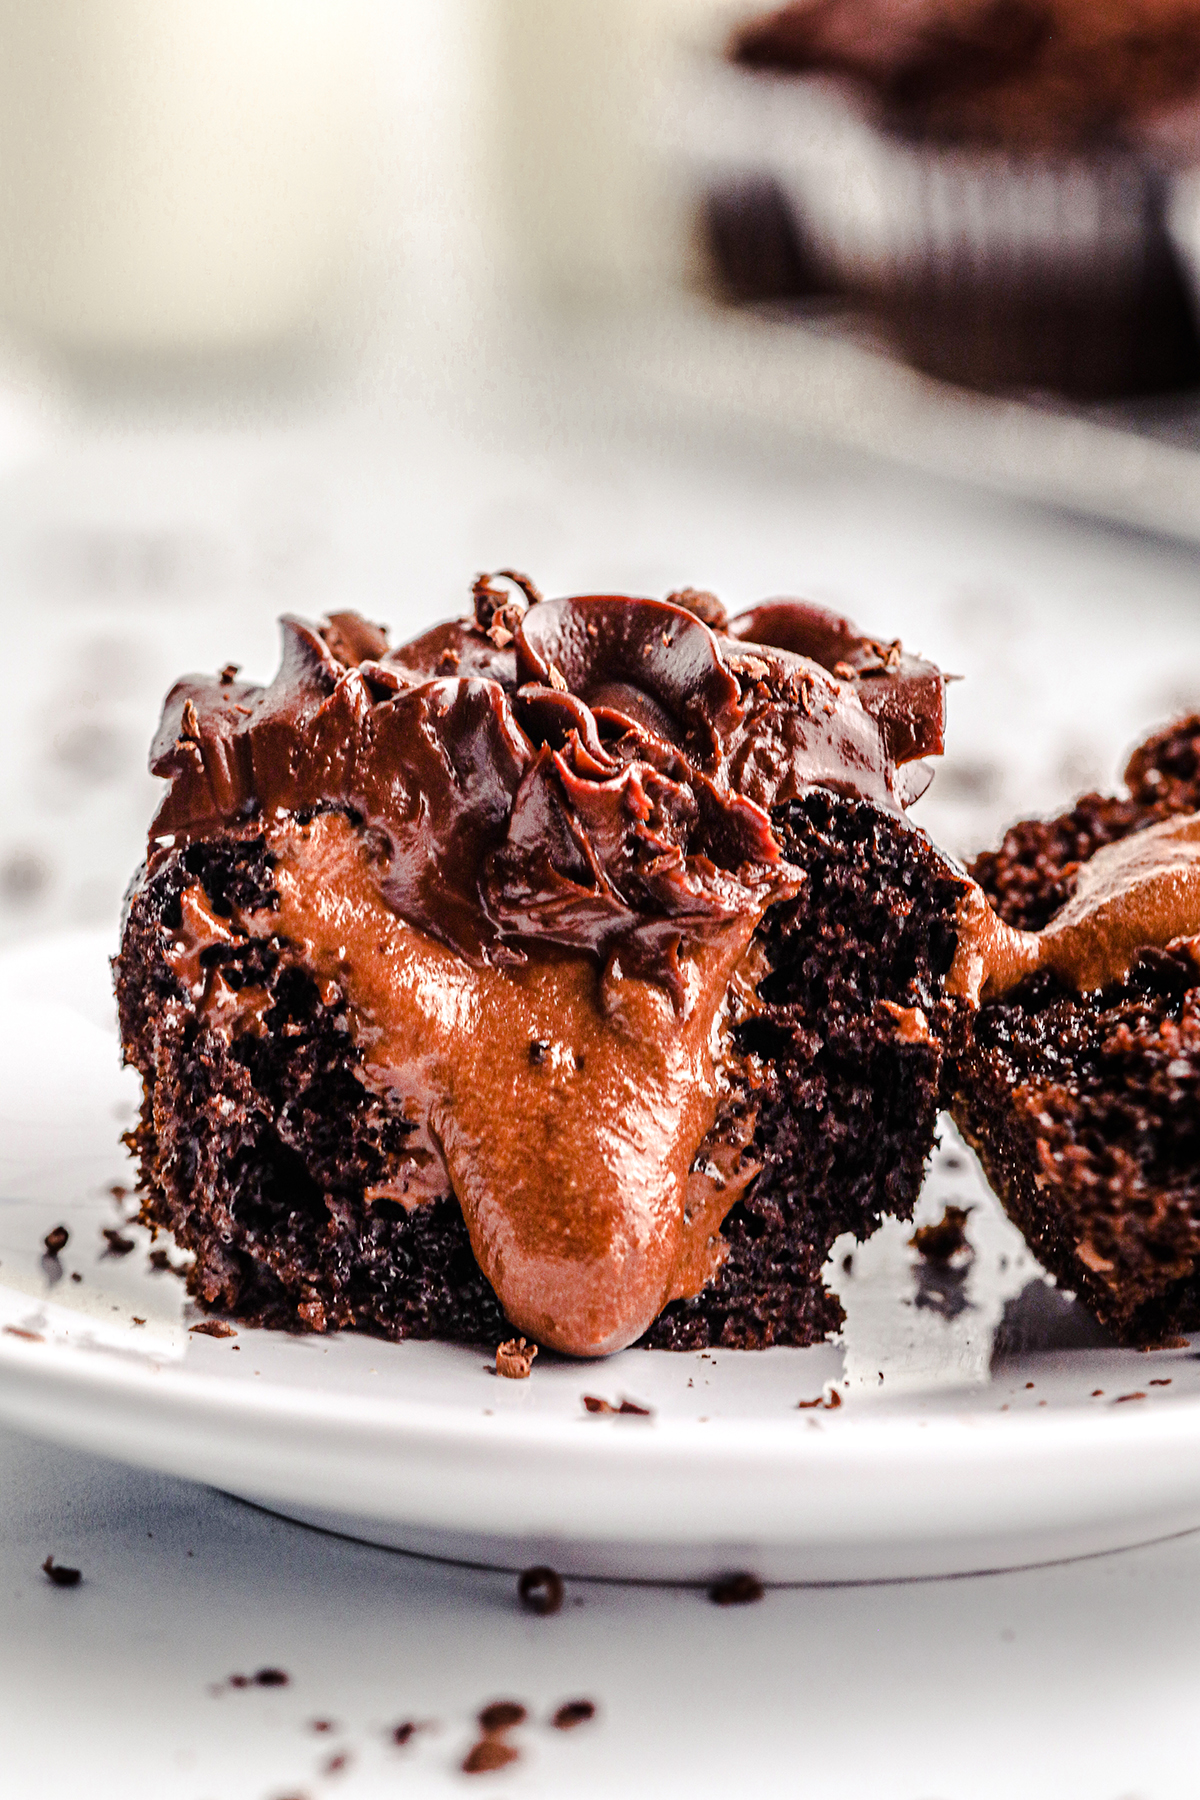 halved chocolate cupcake with chocolate frosting with a chocolate filling oozing out of the center on a small white dish.